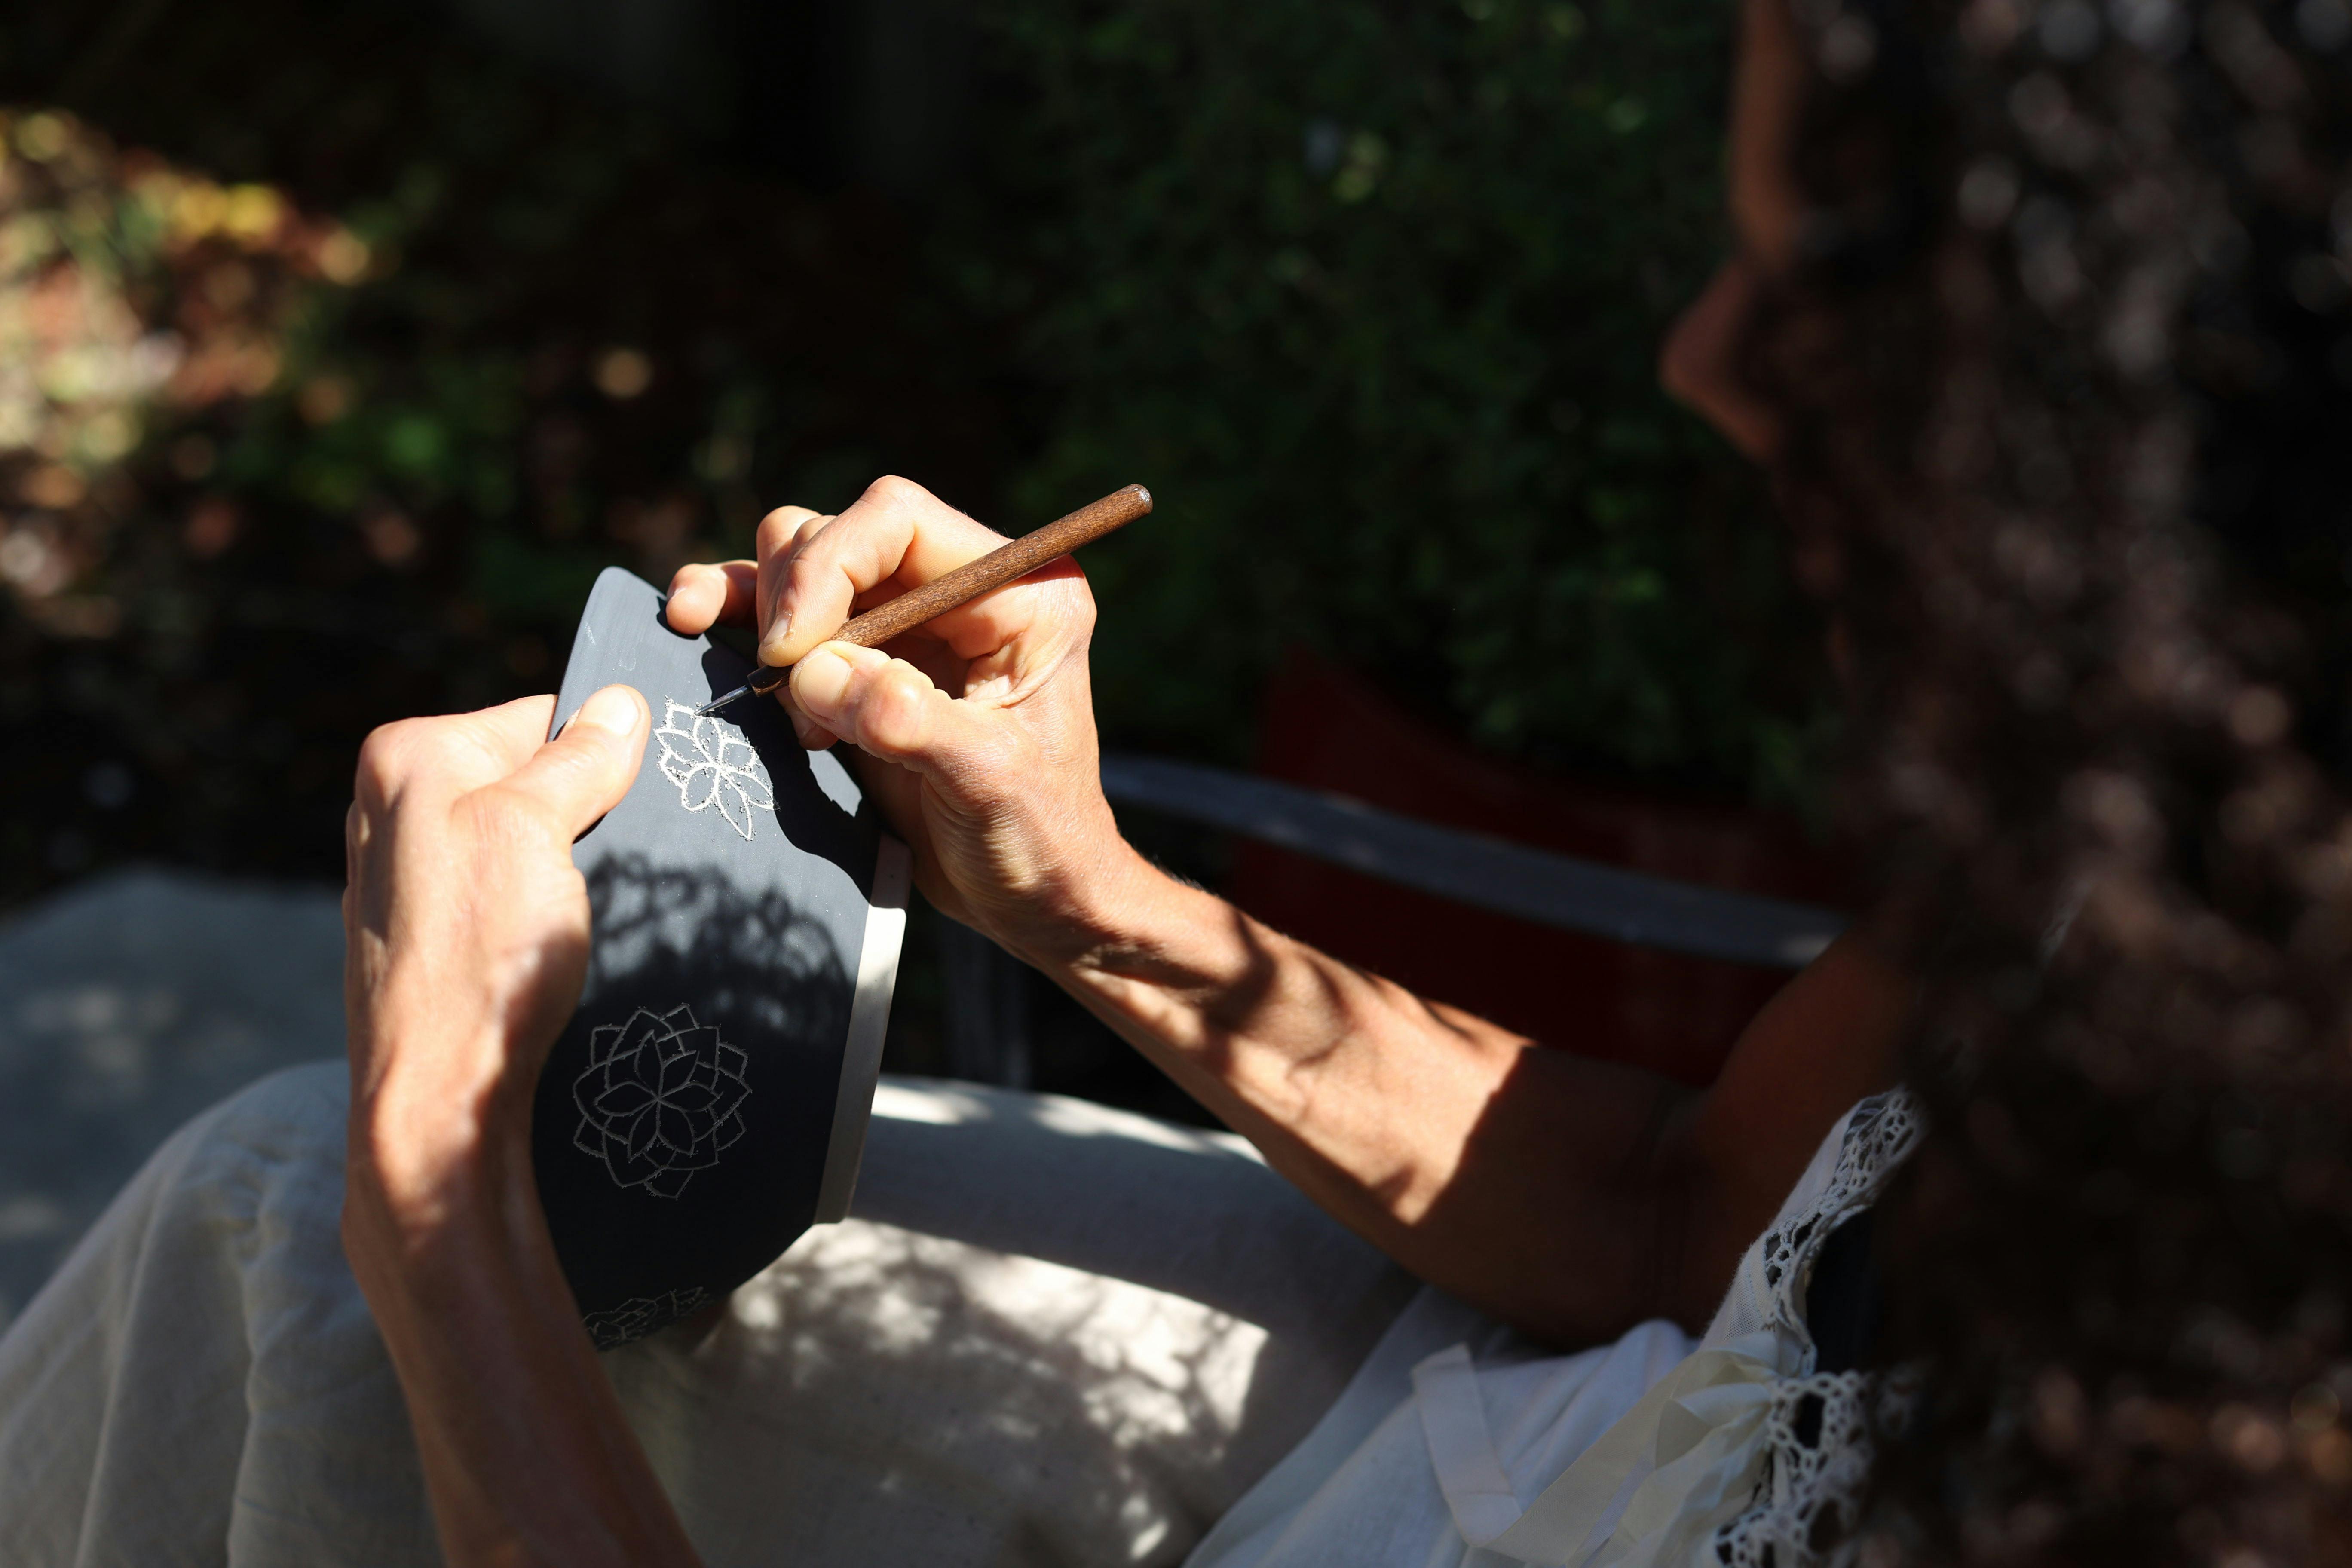 ceramic artist engraving a floral design on a bowl lit by dappled sunlight